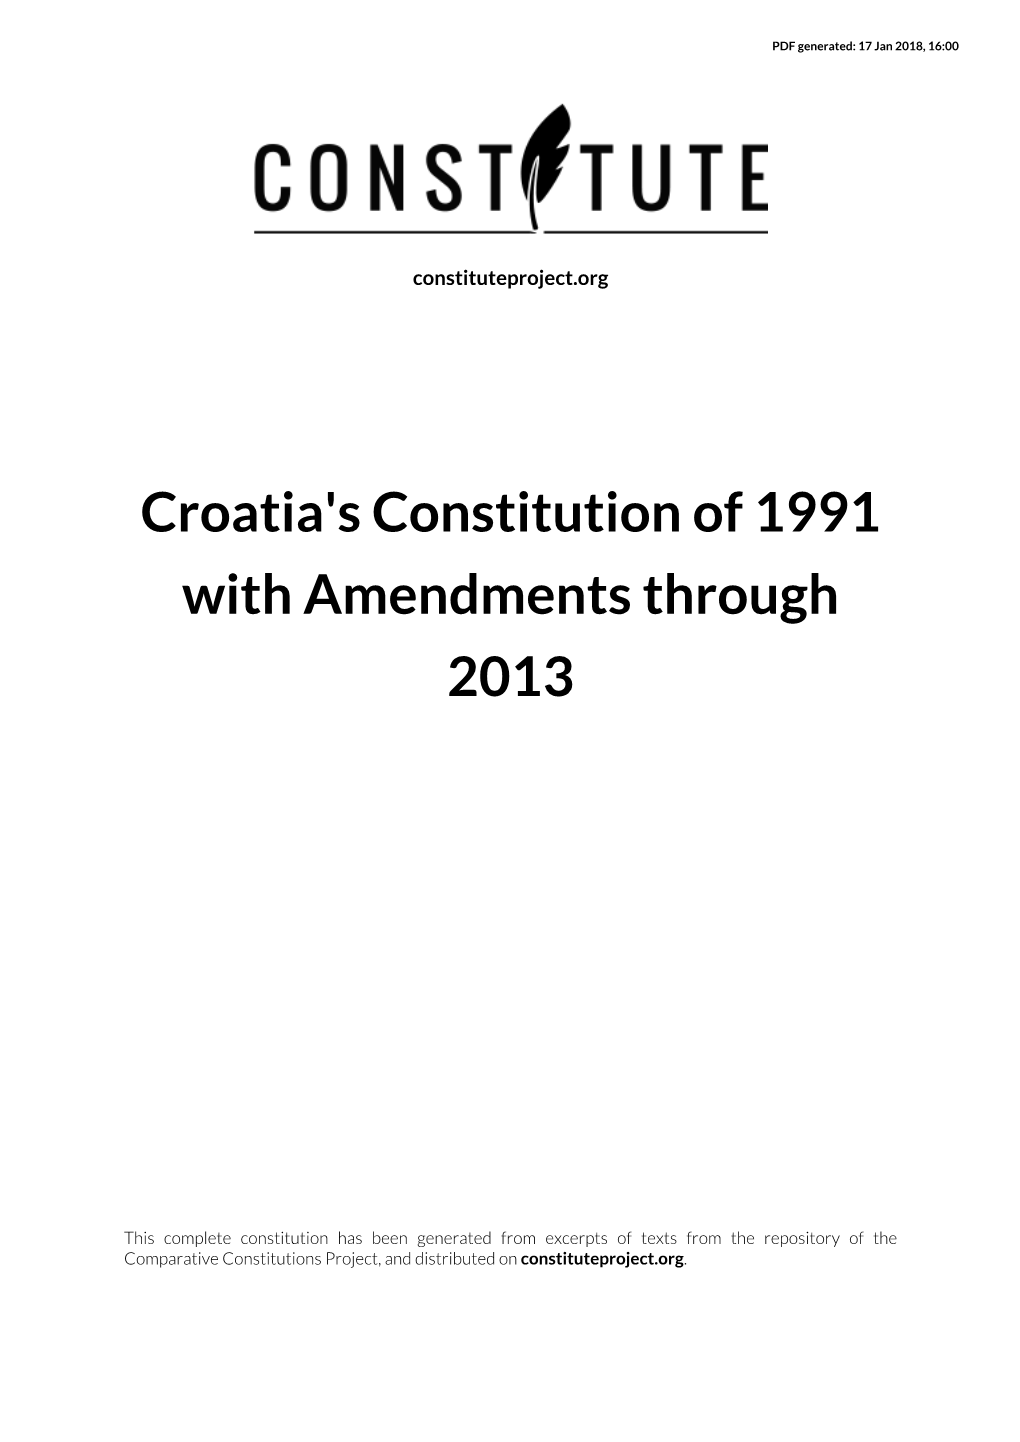 Croatia's Constitution of 1991 with Amendments Through 2013